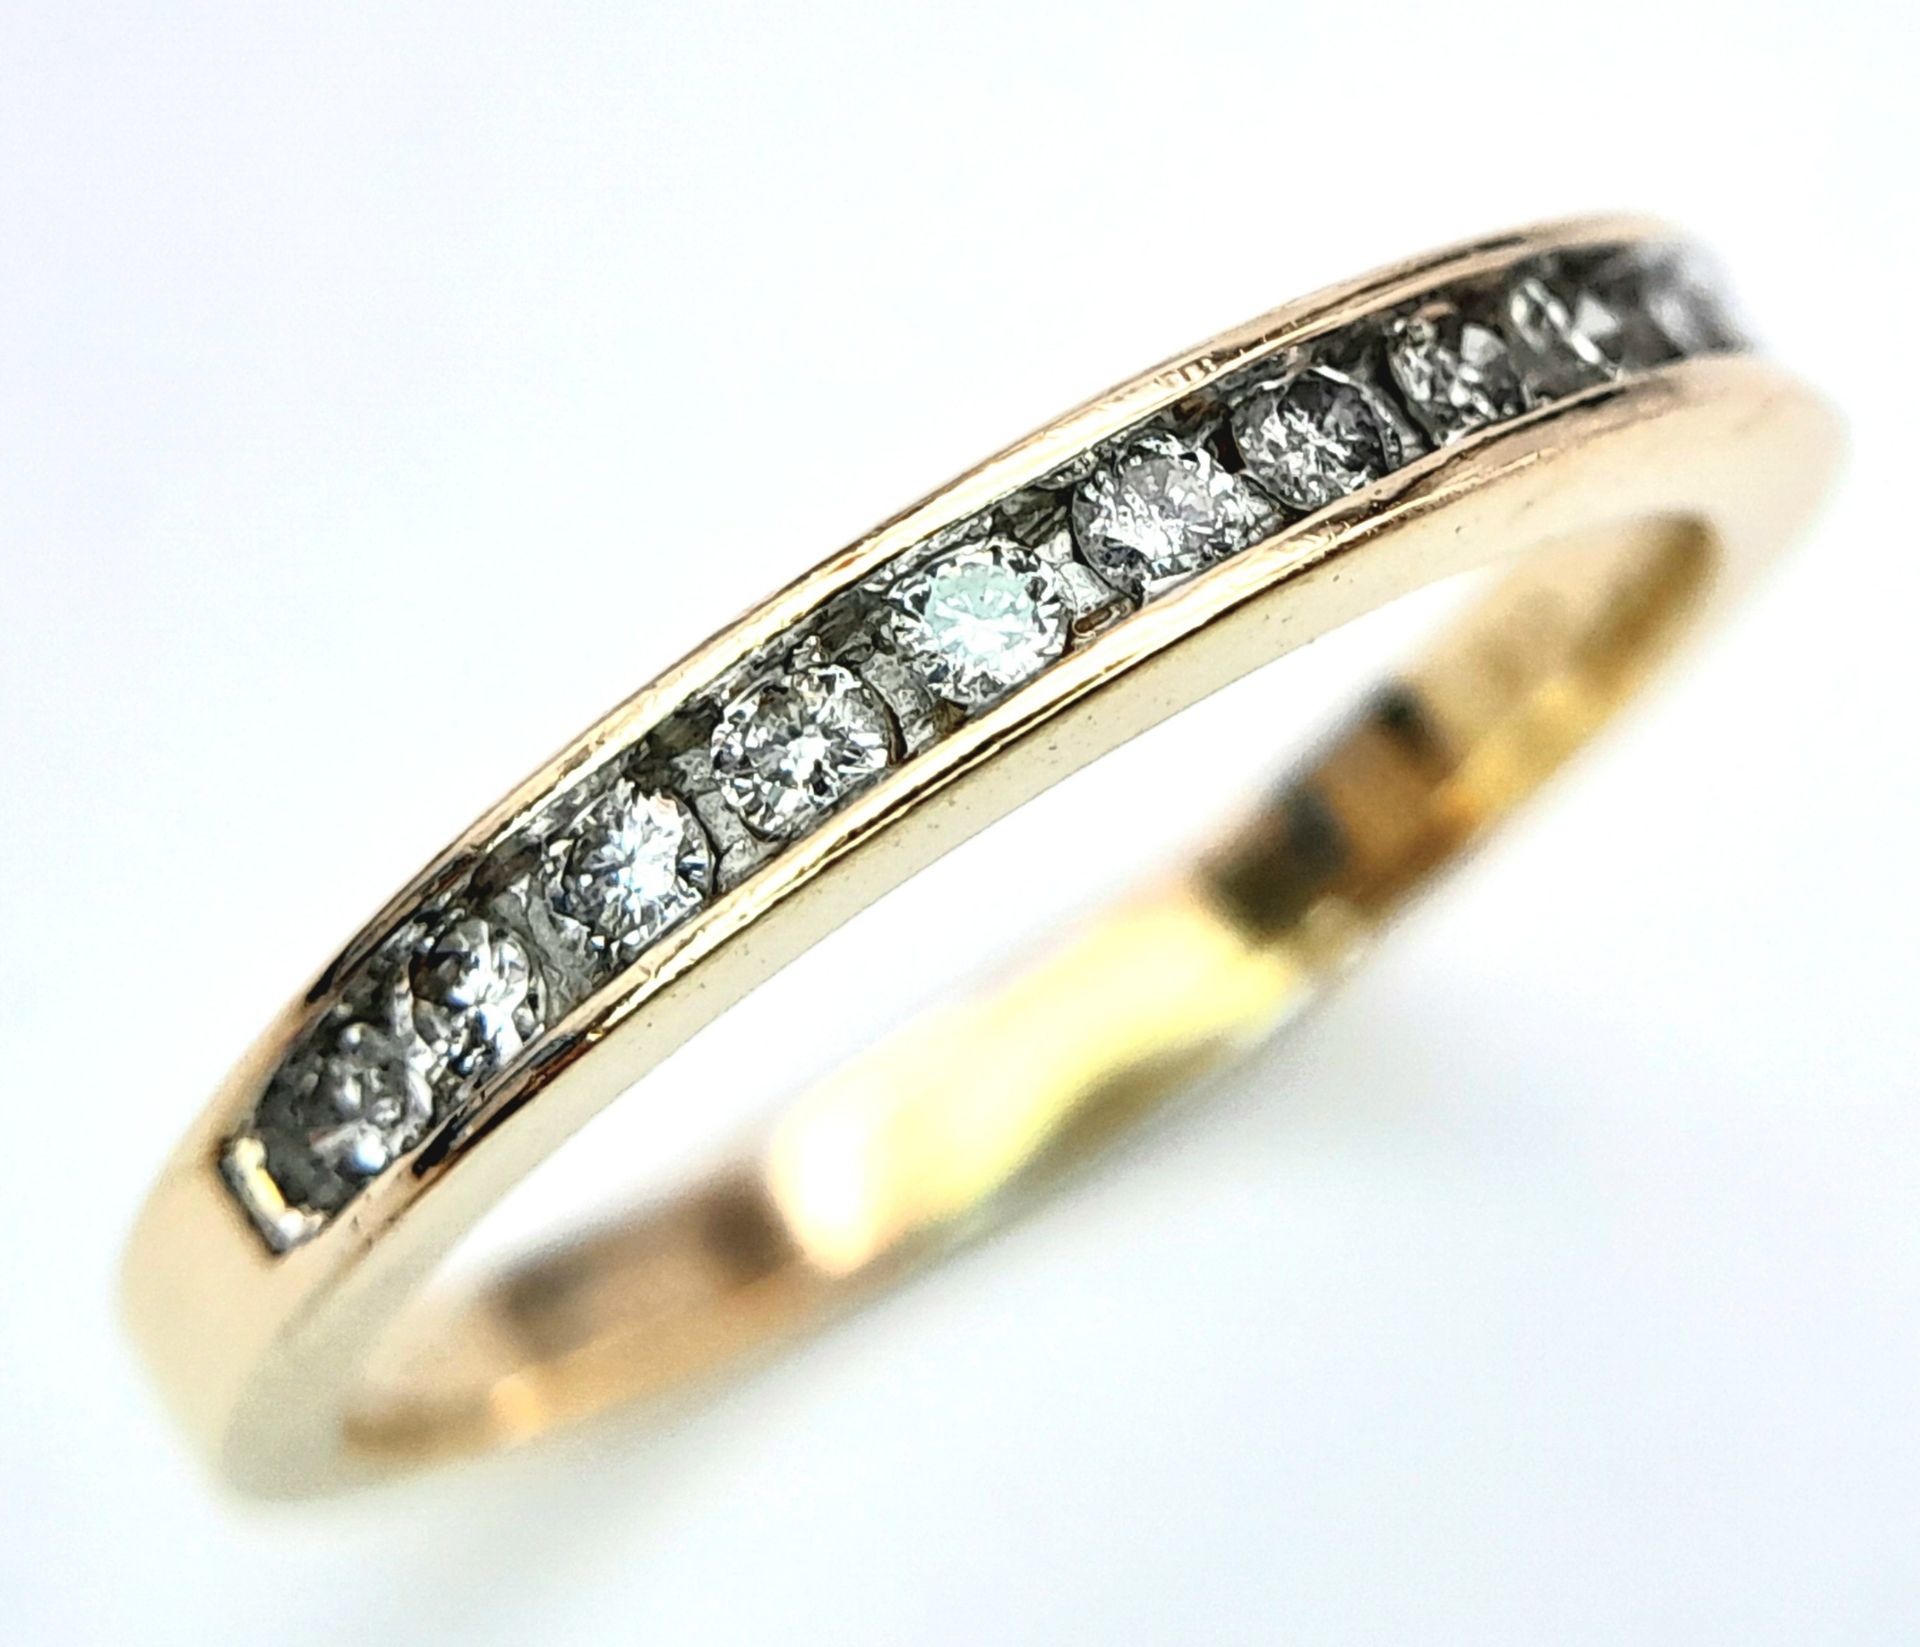 A 14K YELLOW GOLD DIAMOND HALF ETERNITY RING. 0.25ctw, Size N, 2.4g total weight. Ref: SC 8049 - Image 5 of 6